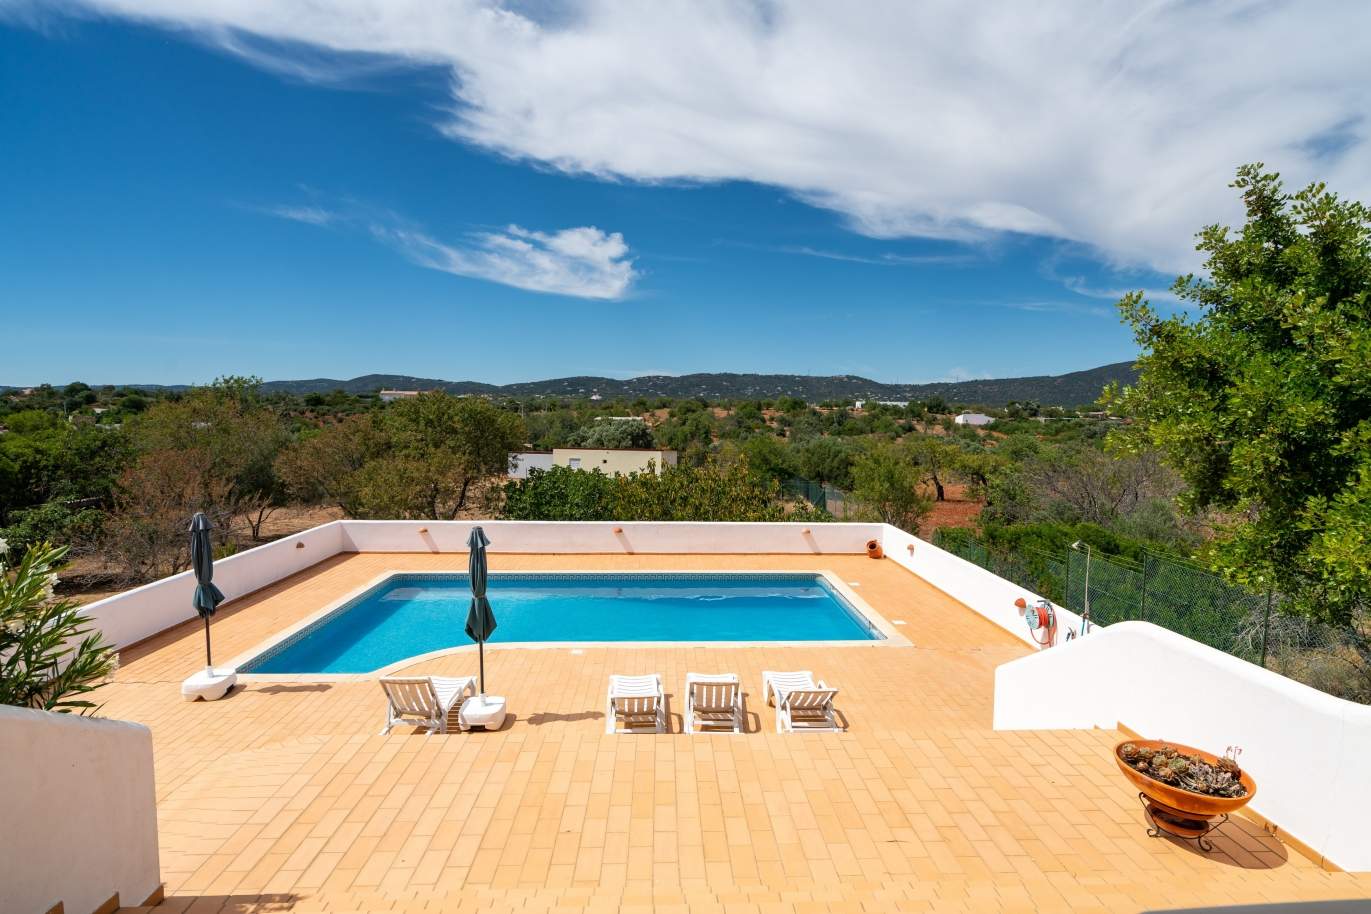 4 Bedroom Villa with Swimming Pool, for sale, Quelfes, Olhão, Algarve_144154